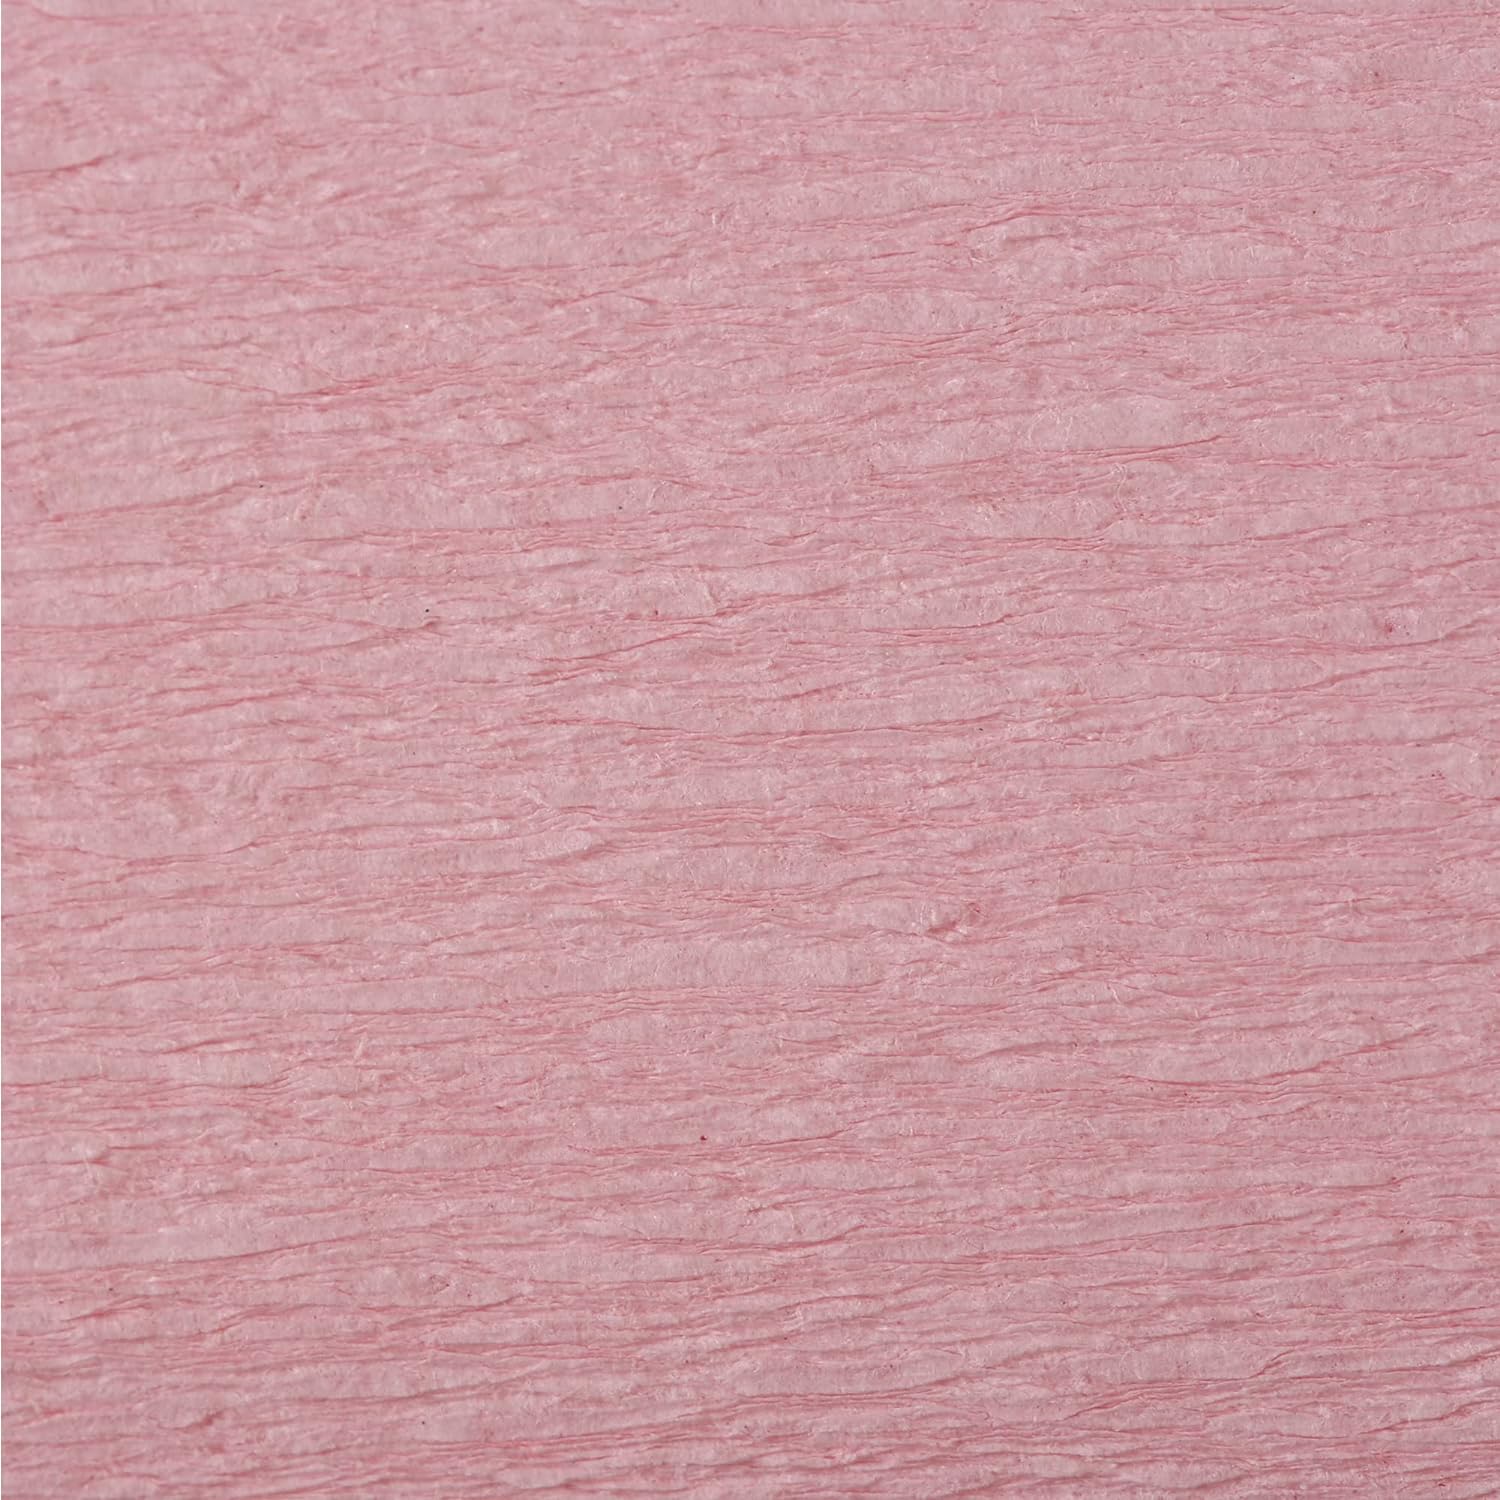 CLAIREFONTAINE Crepe Paper Roll 75% 2.5x0.5M Pale Pink